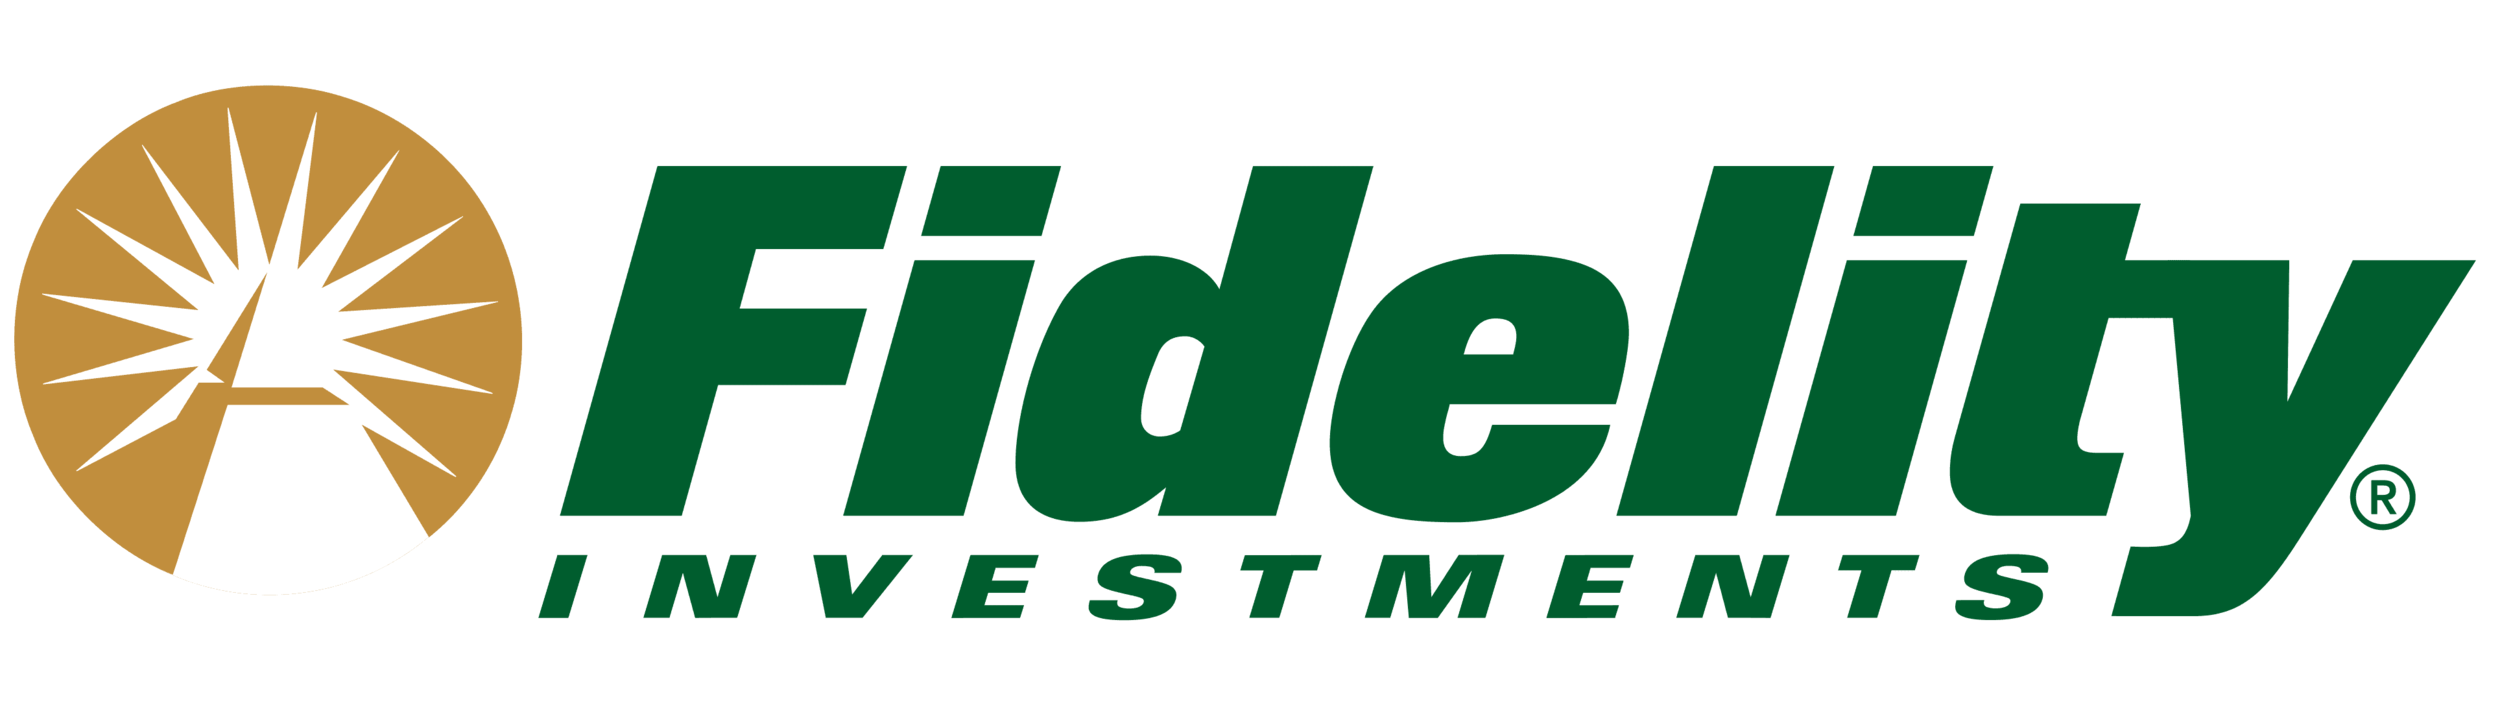 fidelity-logo-PNG.png